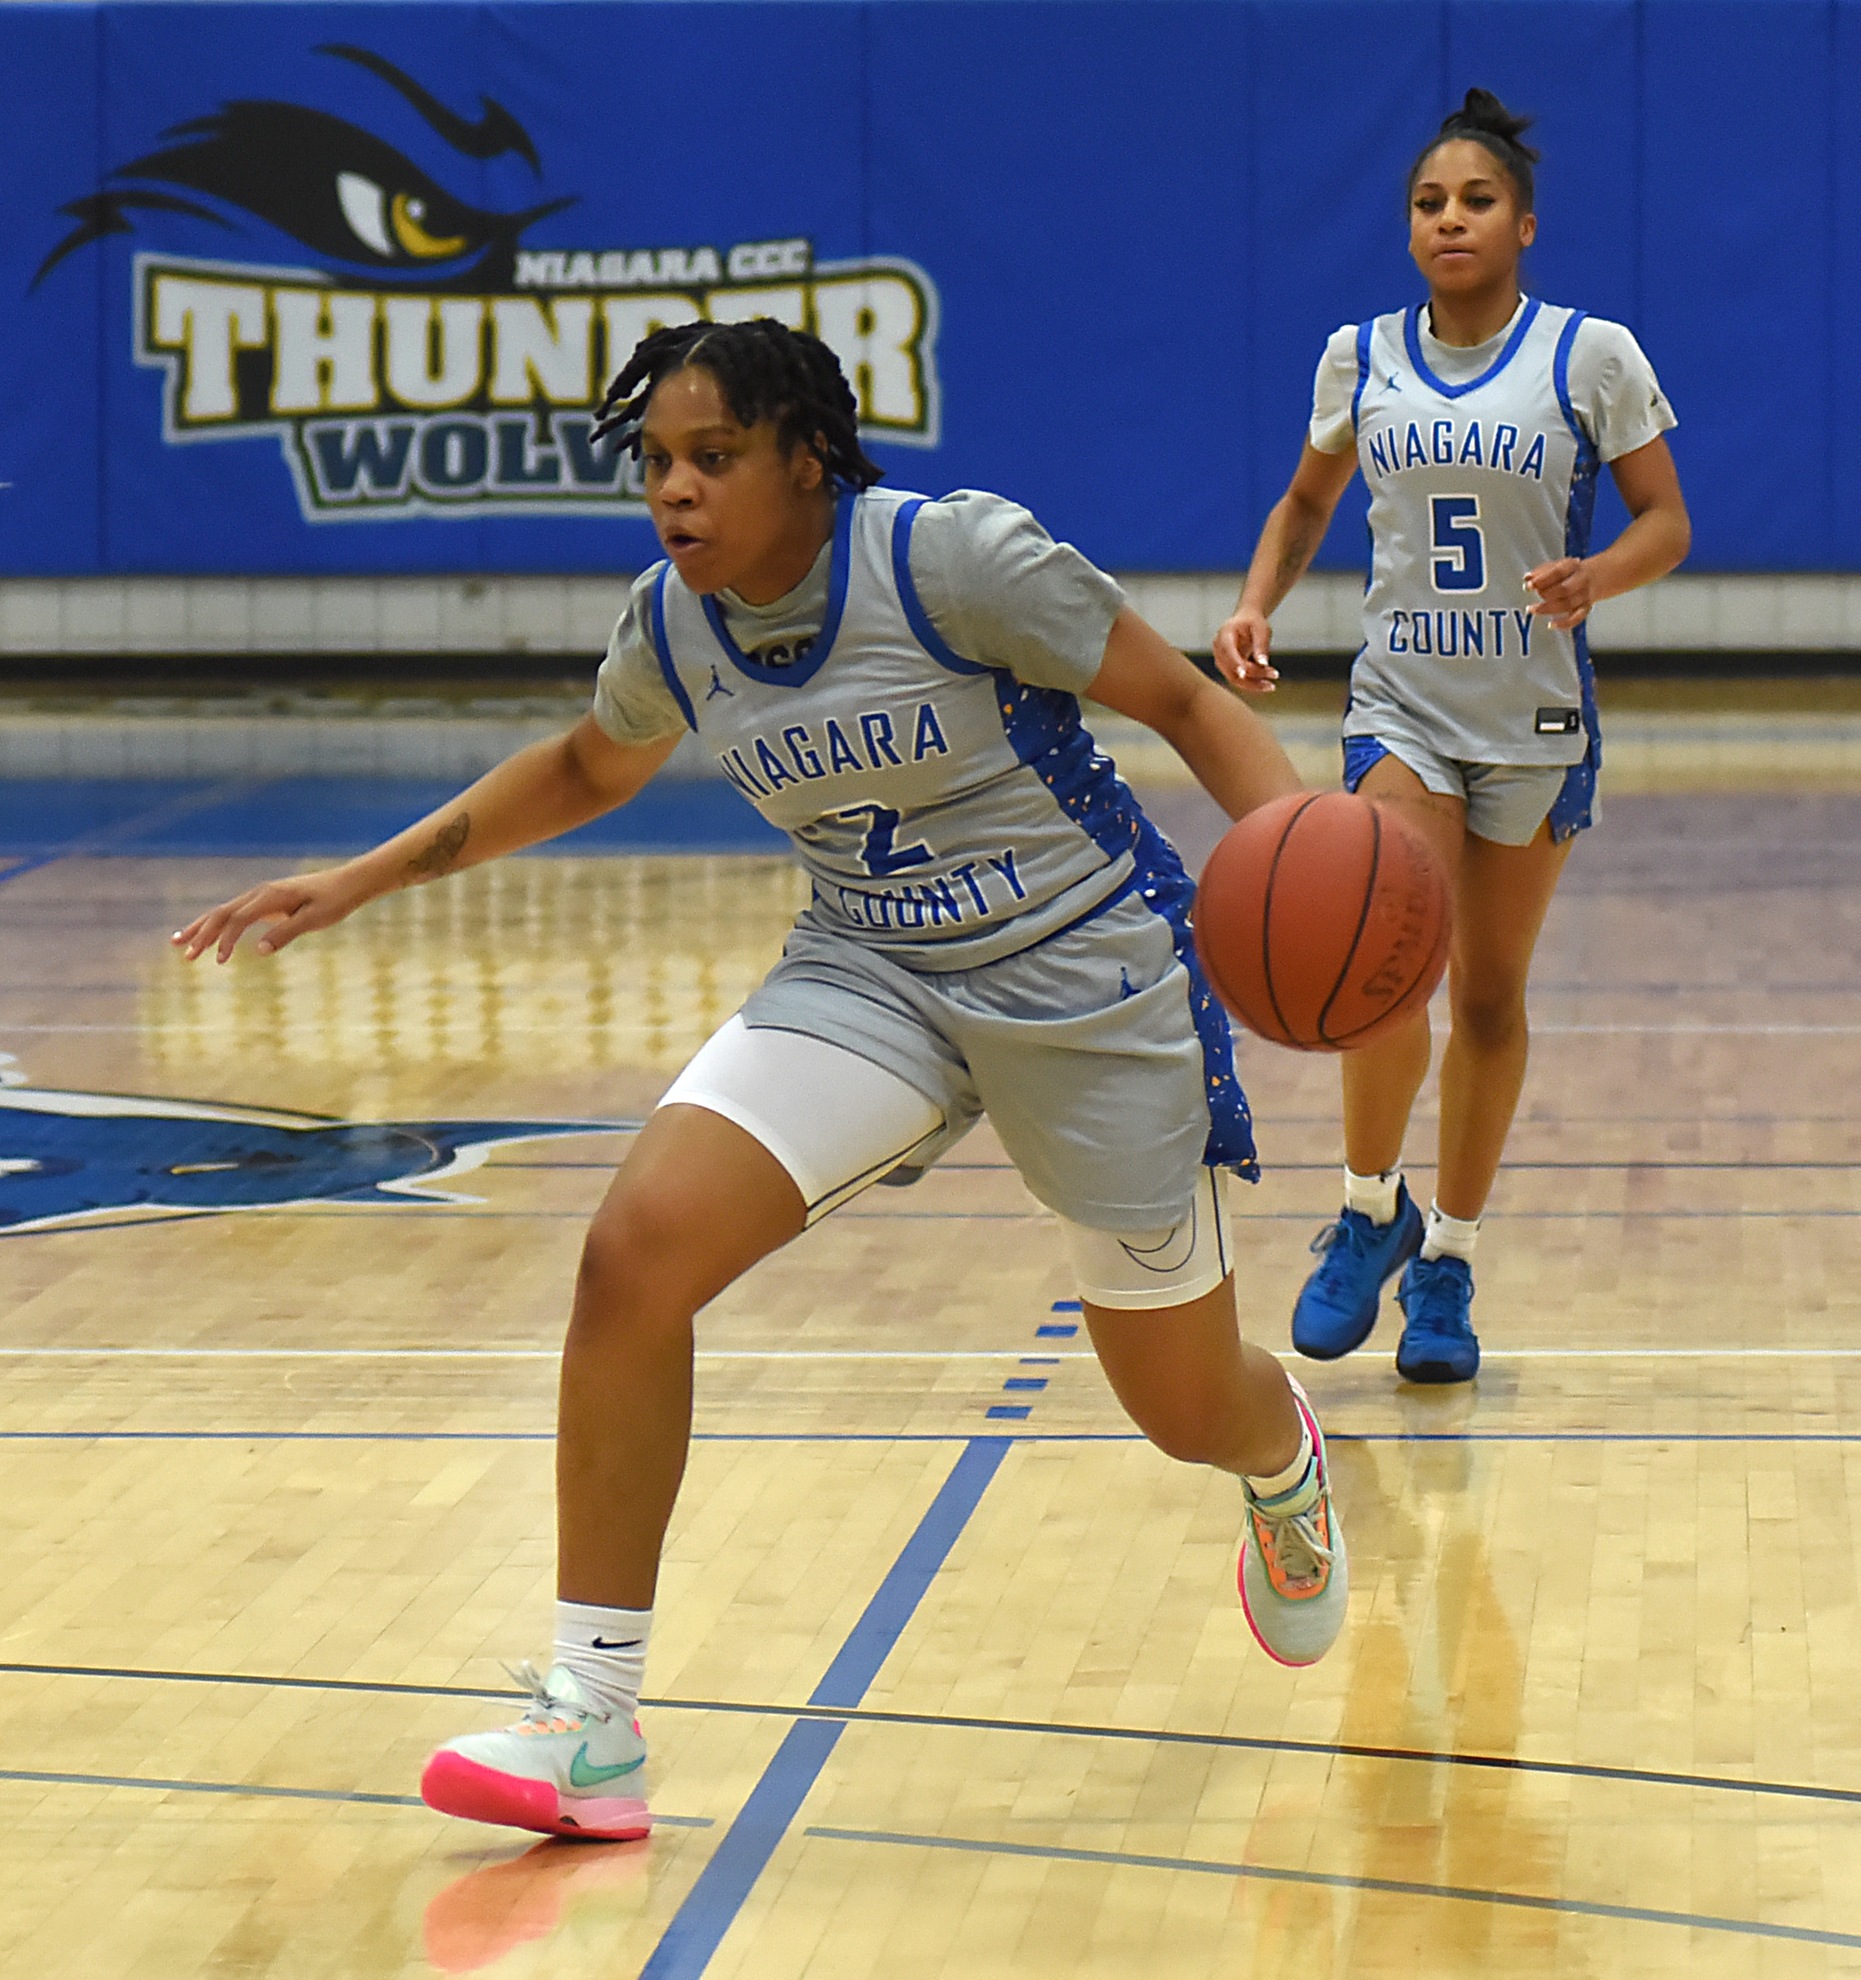 NCCC drops first game of season